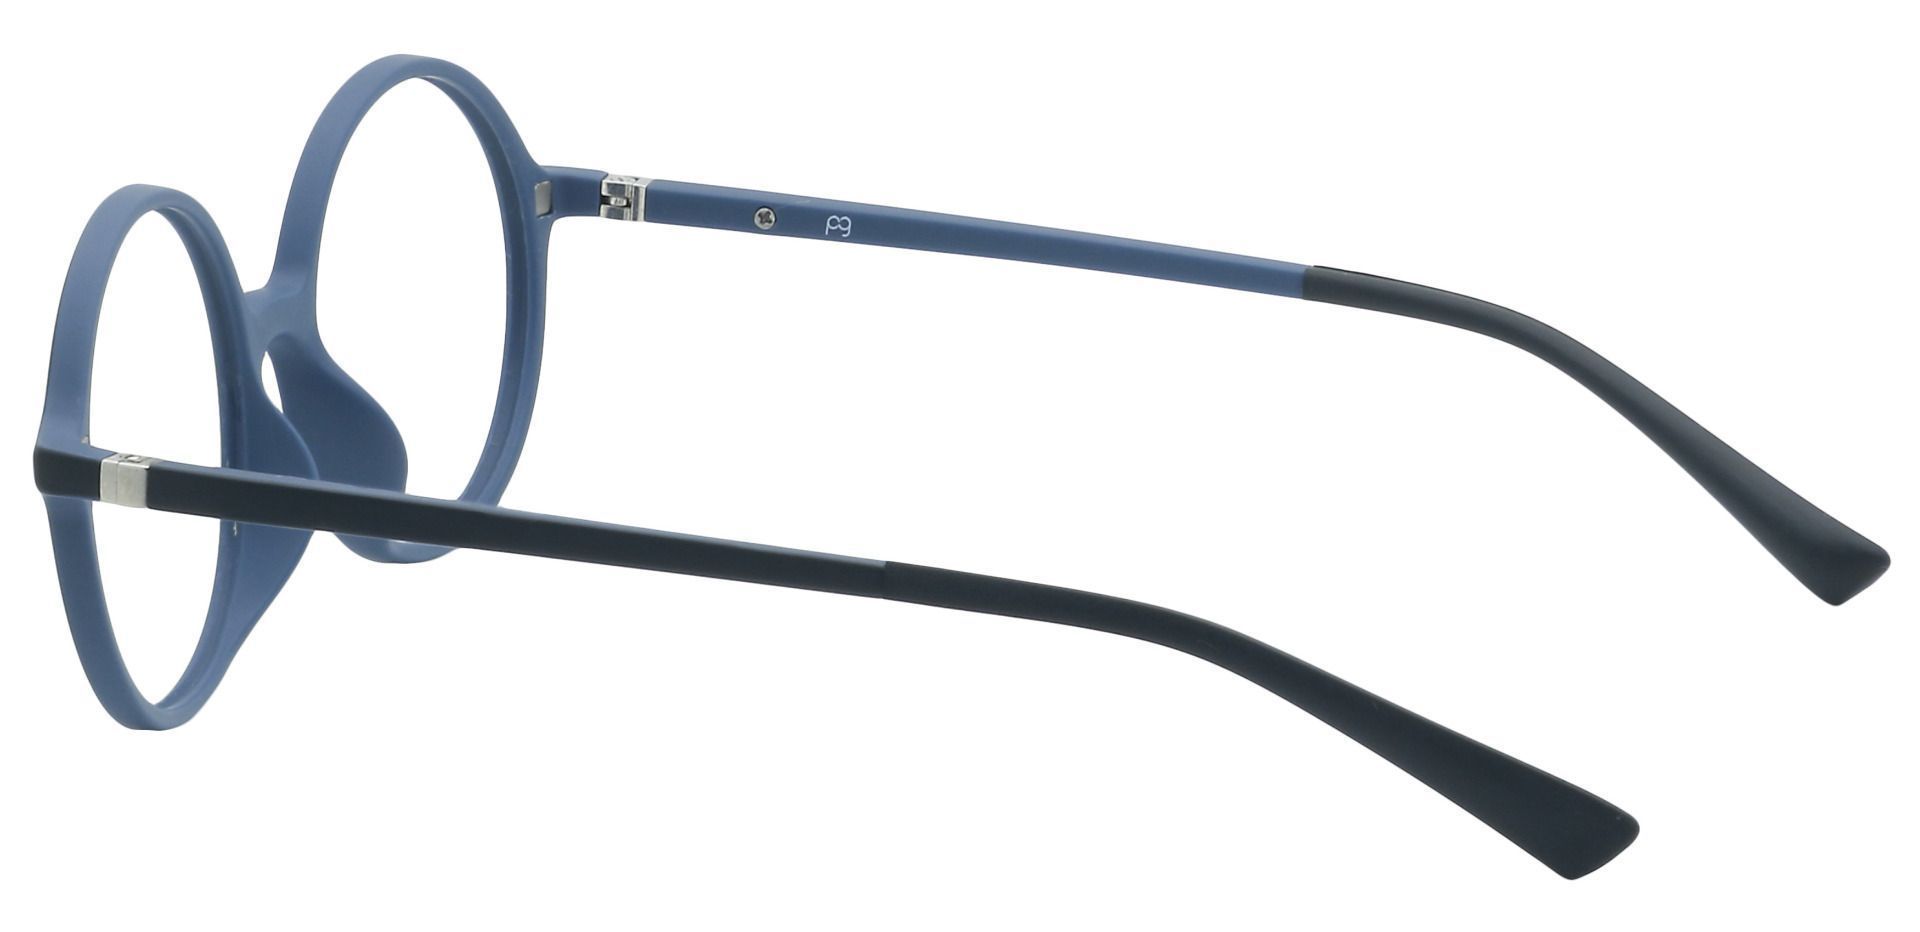 Harlow Round Lined Bifocal Glasses - Blue